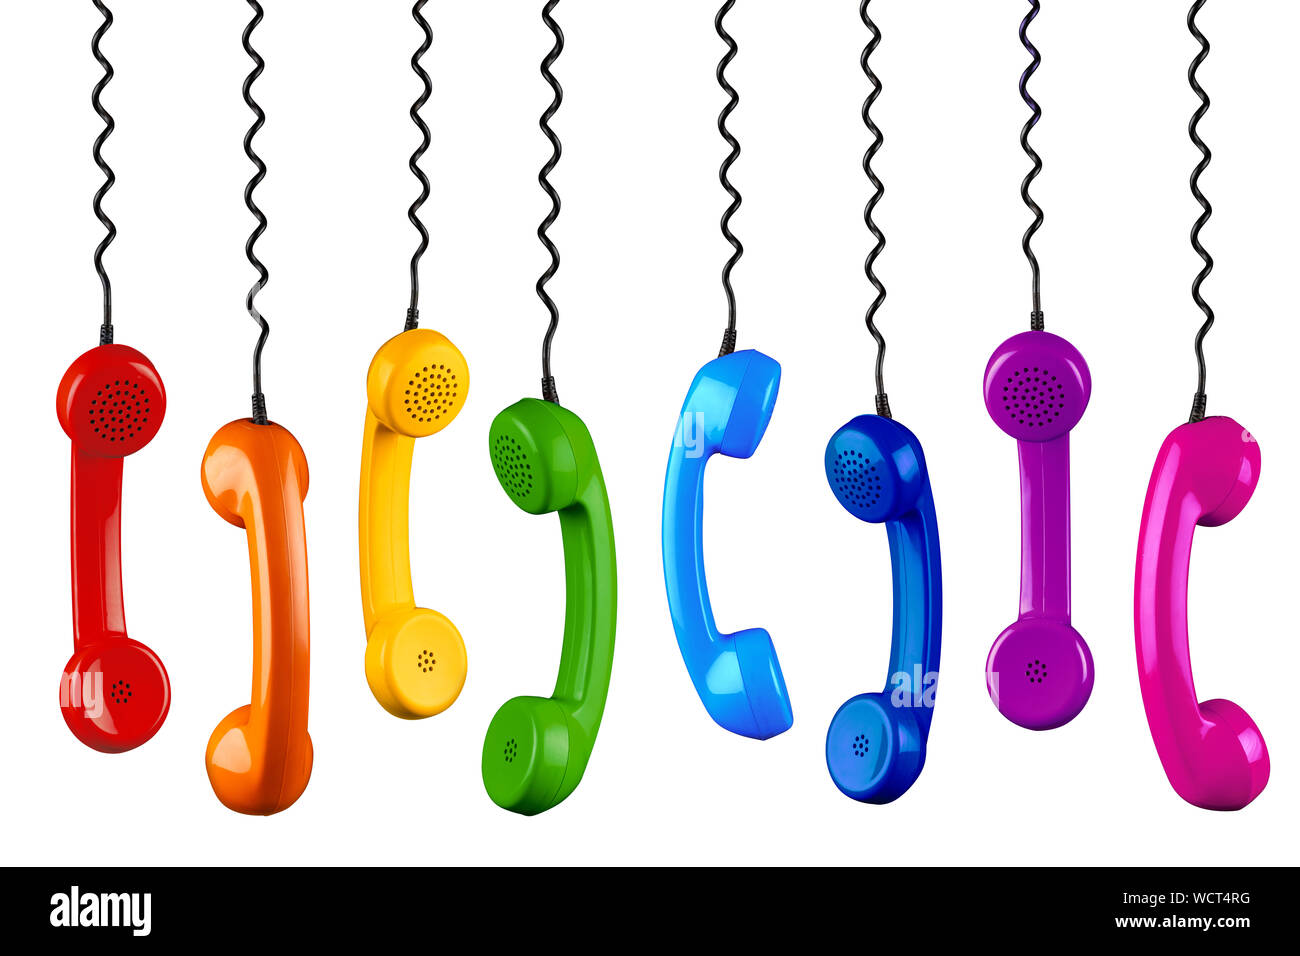 row of colorful rainbow colored old fashioned retro phone reciever with black telephone wire isolated on white background, business communication supp Stock Photo